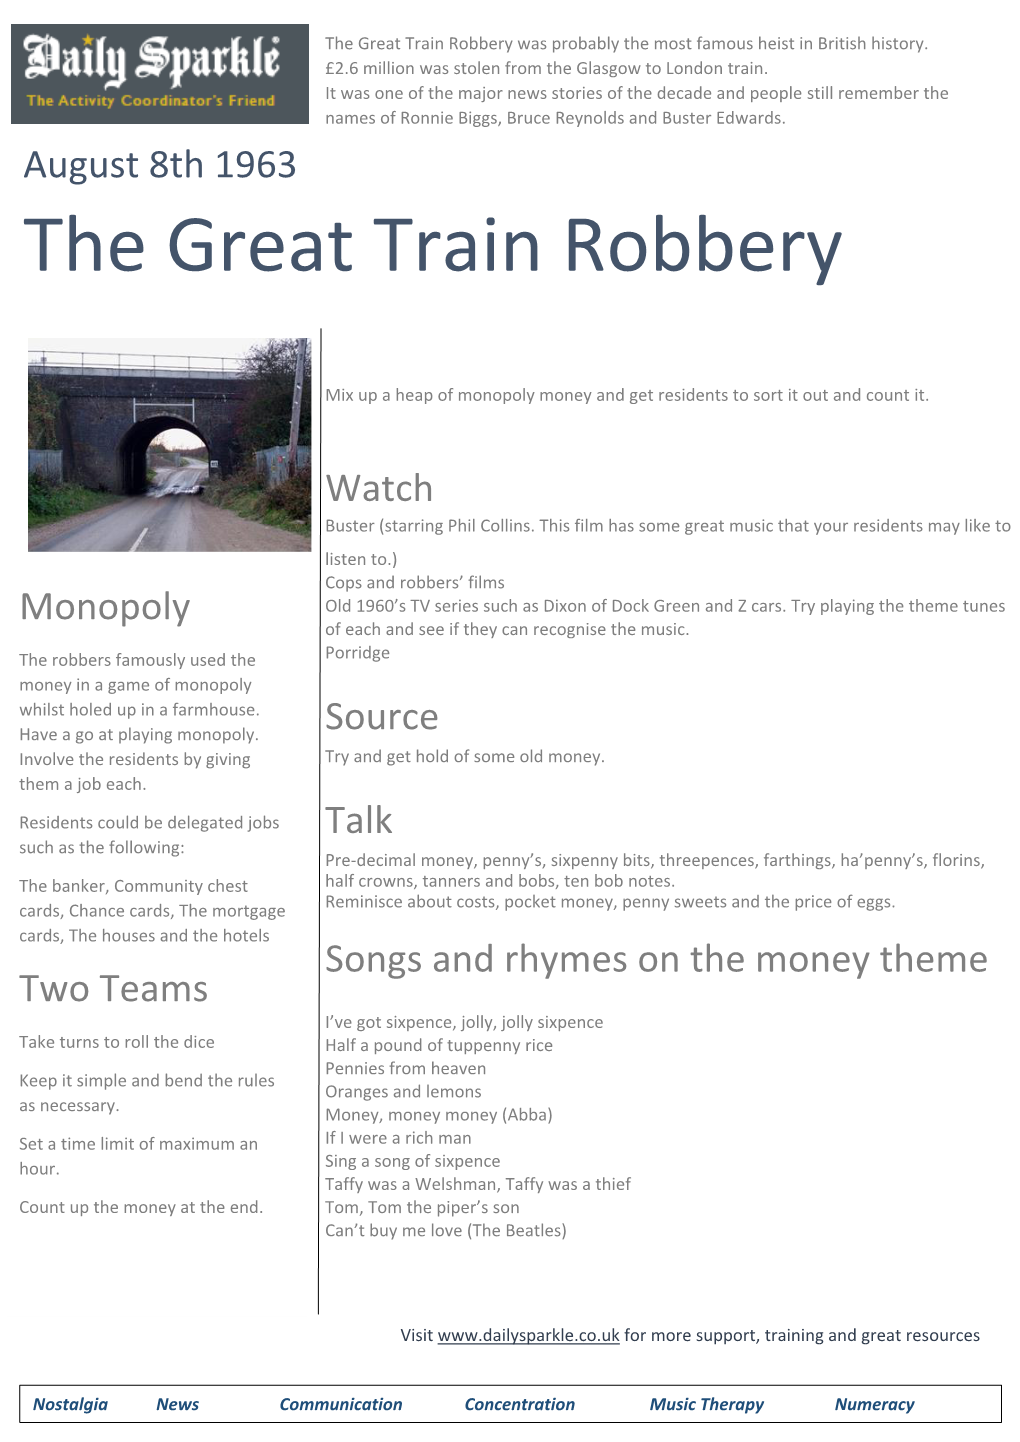 The Great Train Robbery Was Probably the Most Famous Heist in British History